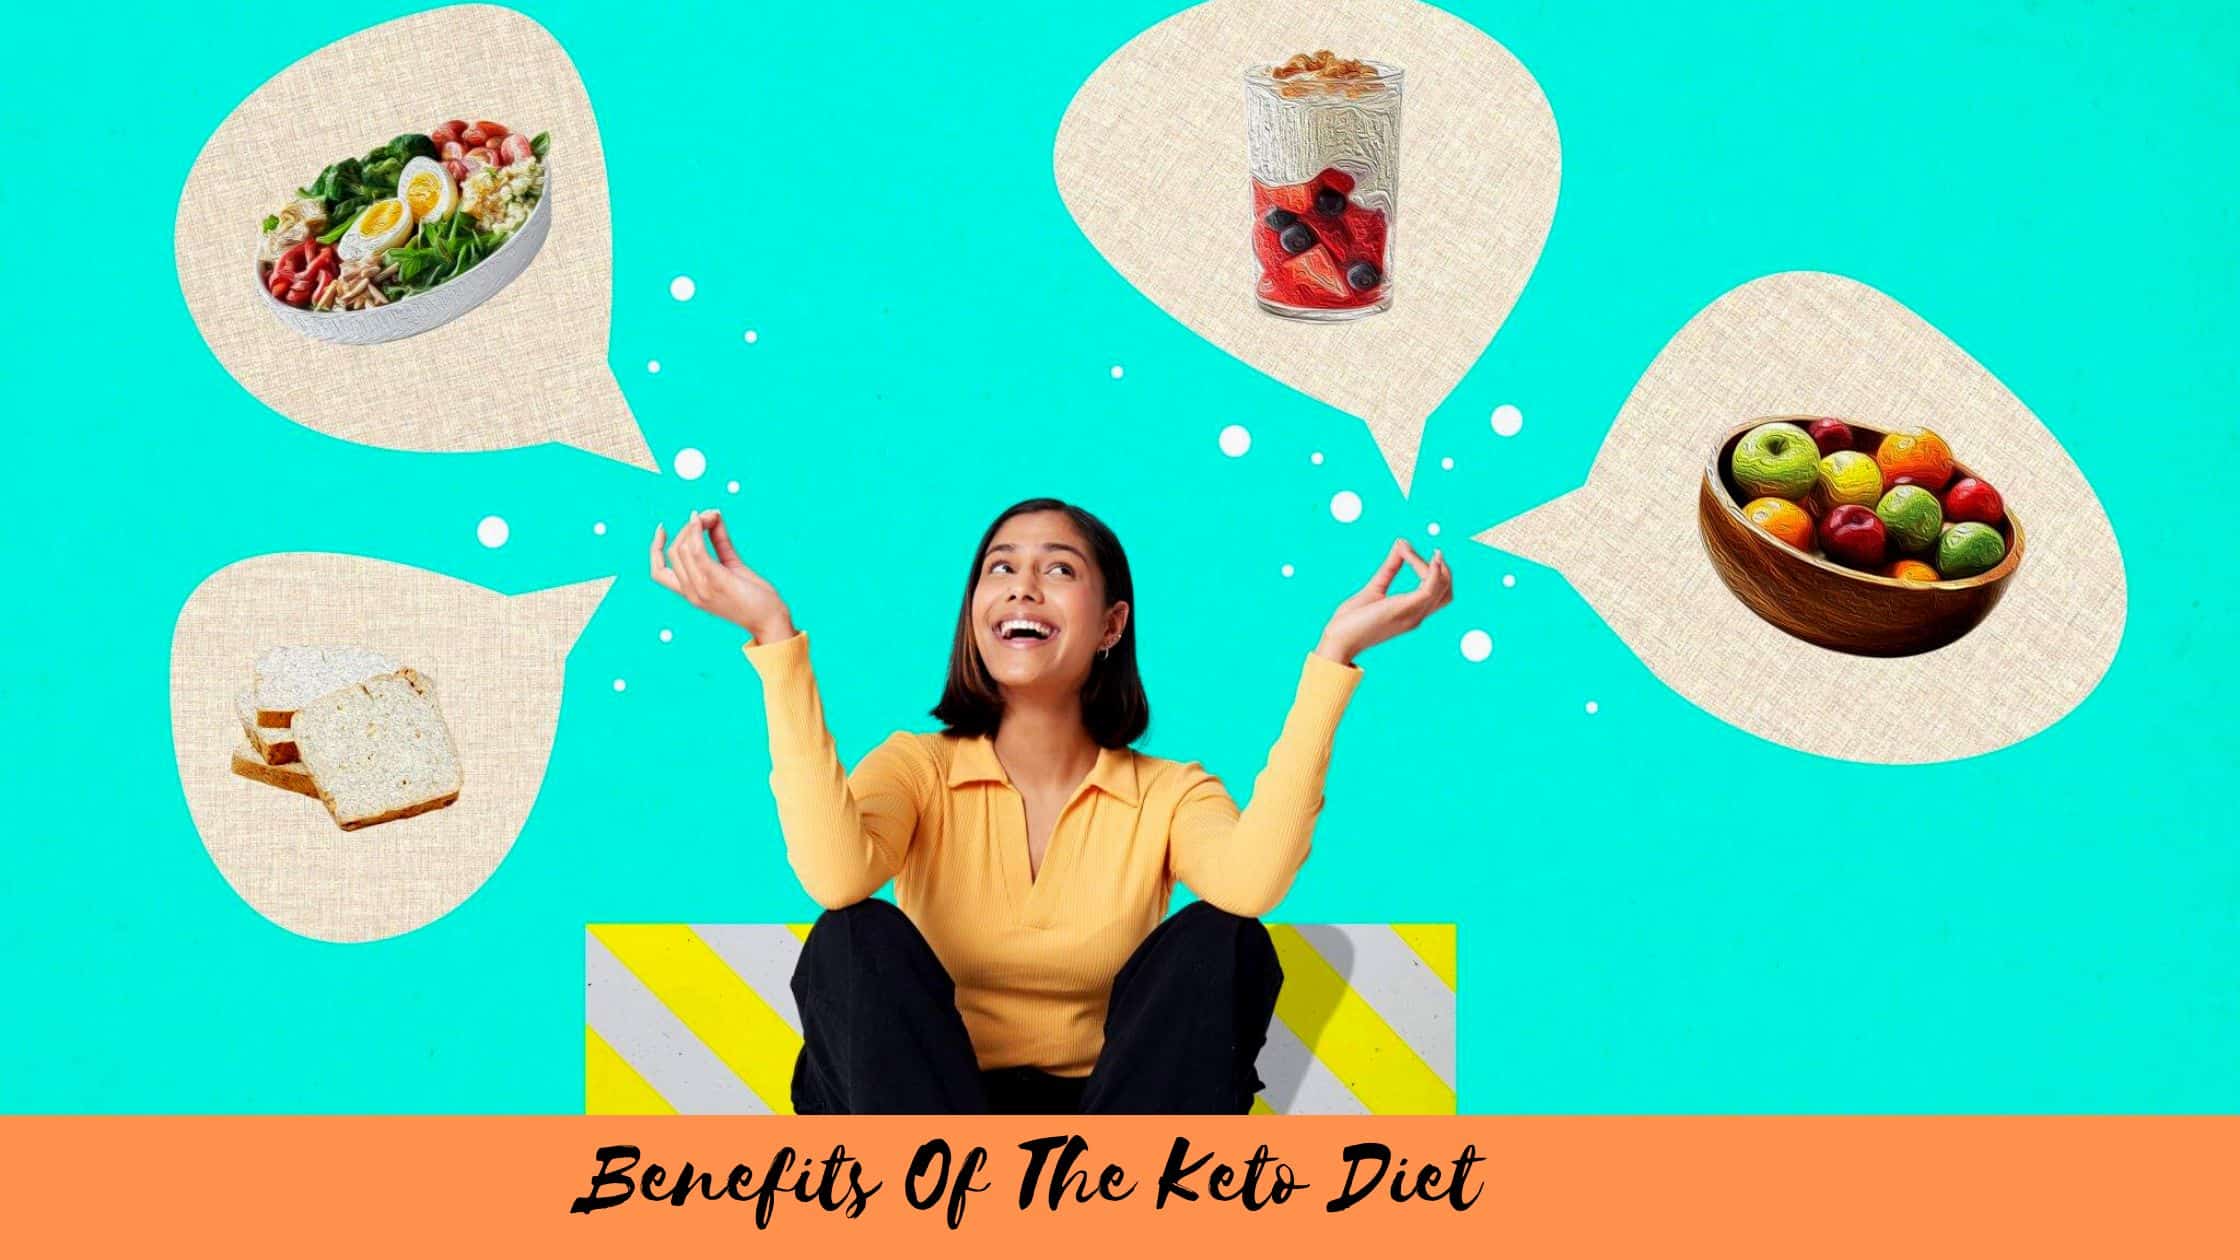 Benefits Of The Keto Diet